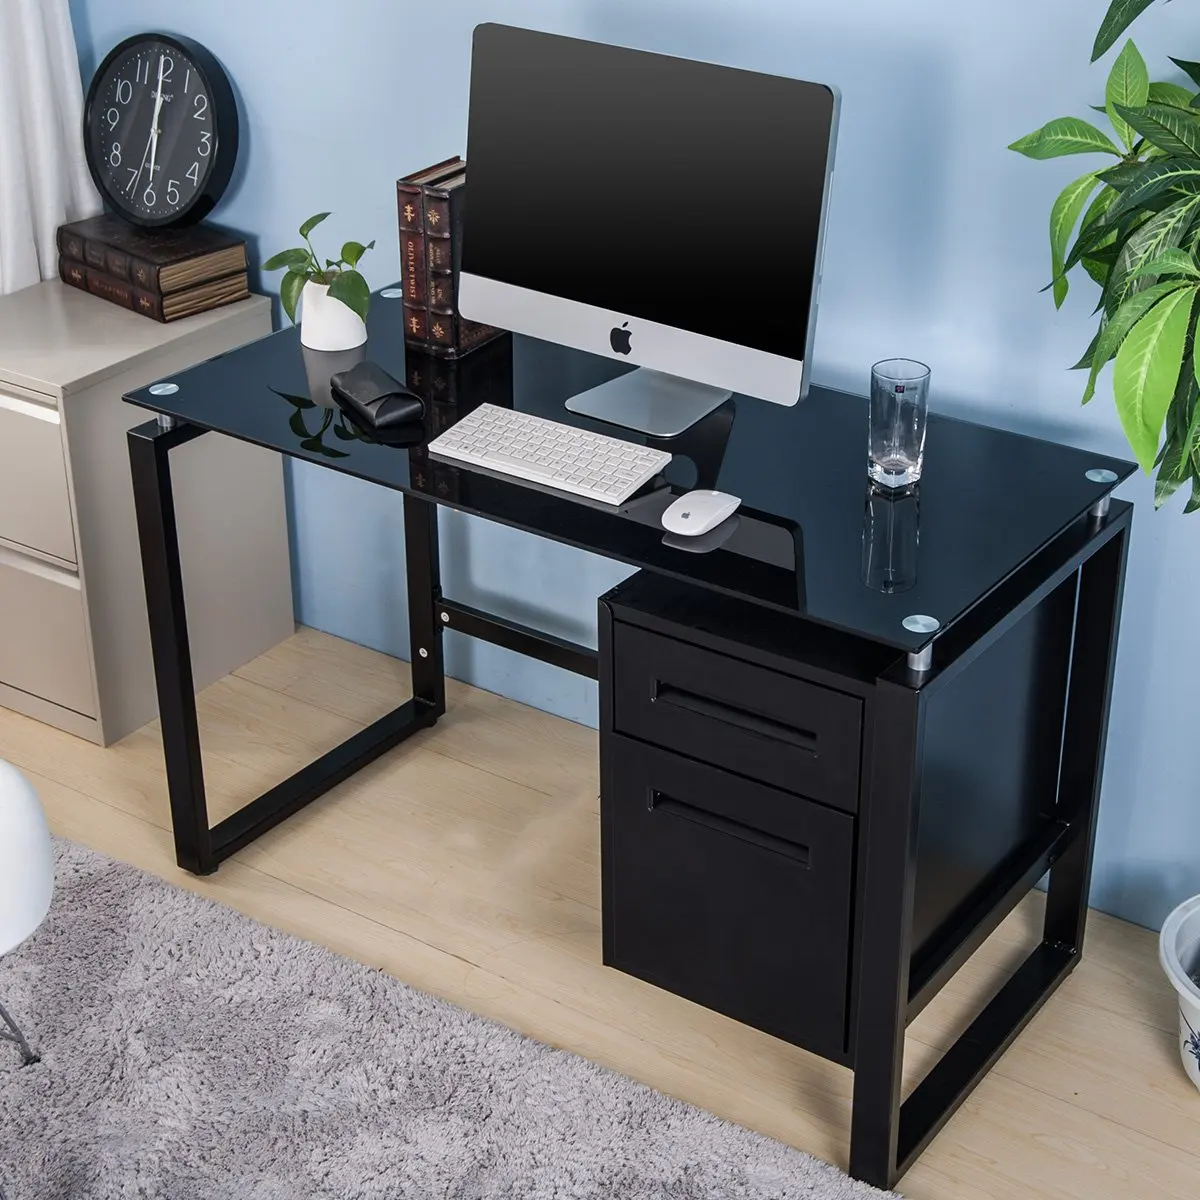 152.96. Merax Home Office Computer Desk Table Workstation with Metal Cabine...